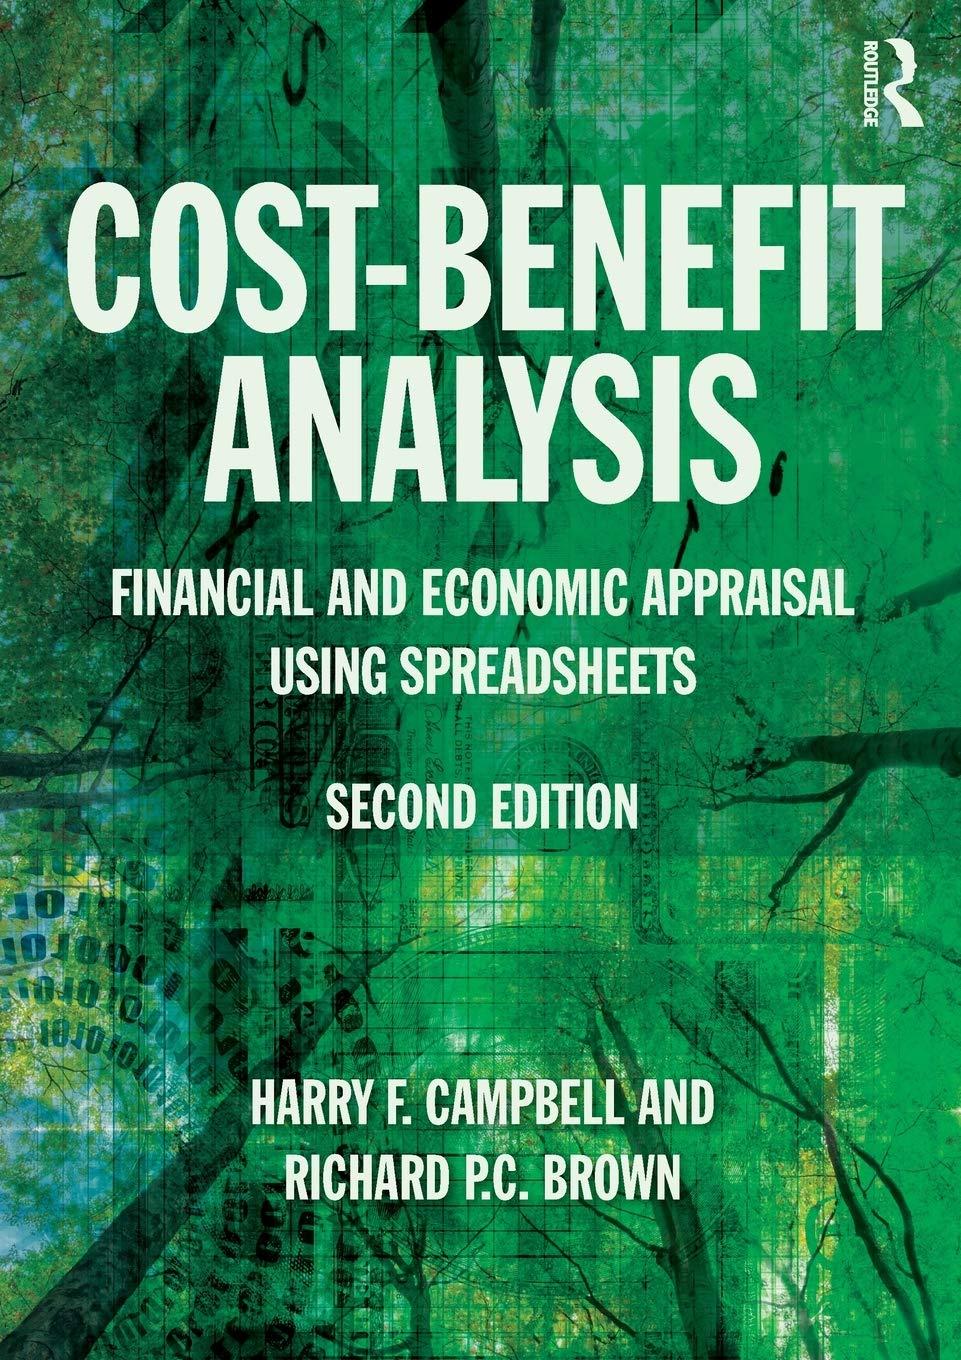 cost benefit analysis financial and economic appraisal using spreadsheets 2nd edition harry f. campbell